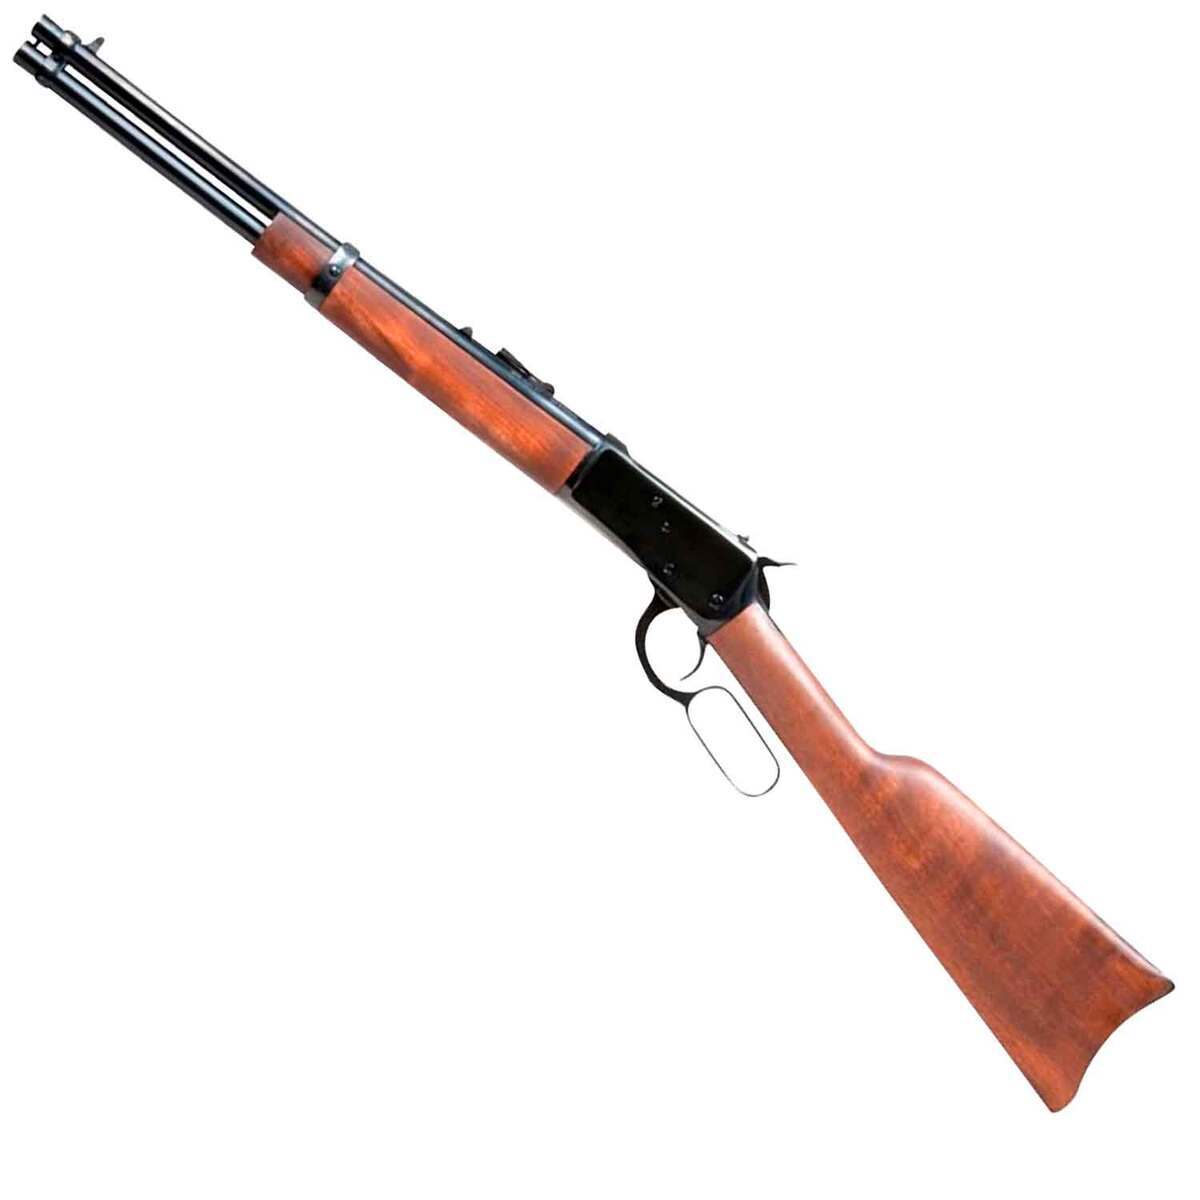 Can a .38 special lever action rifle be modified to shoot 9mm